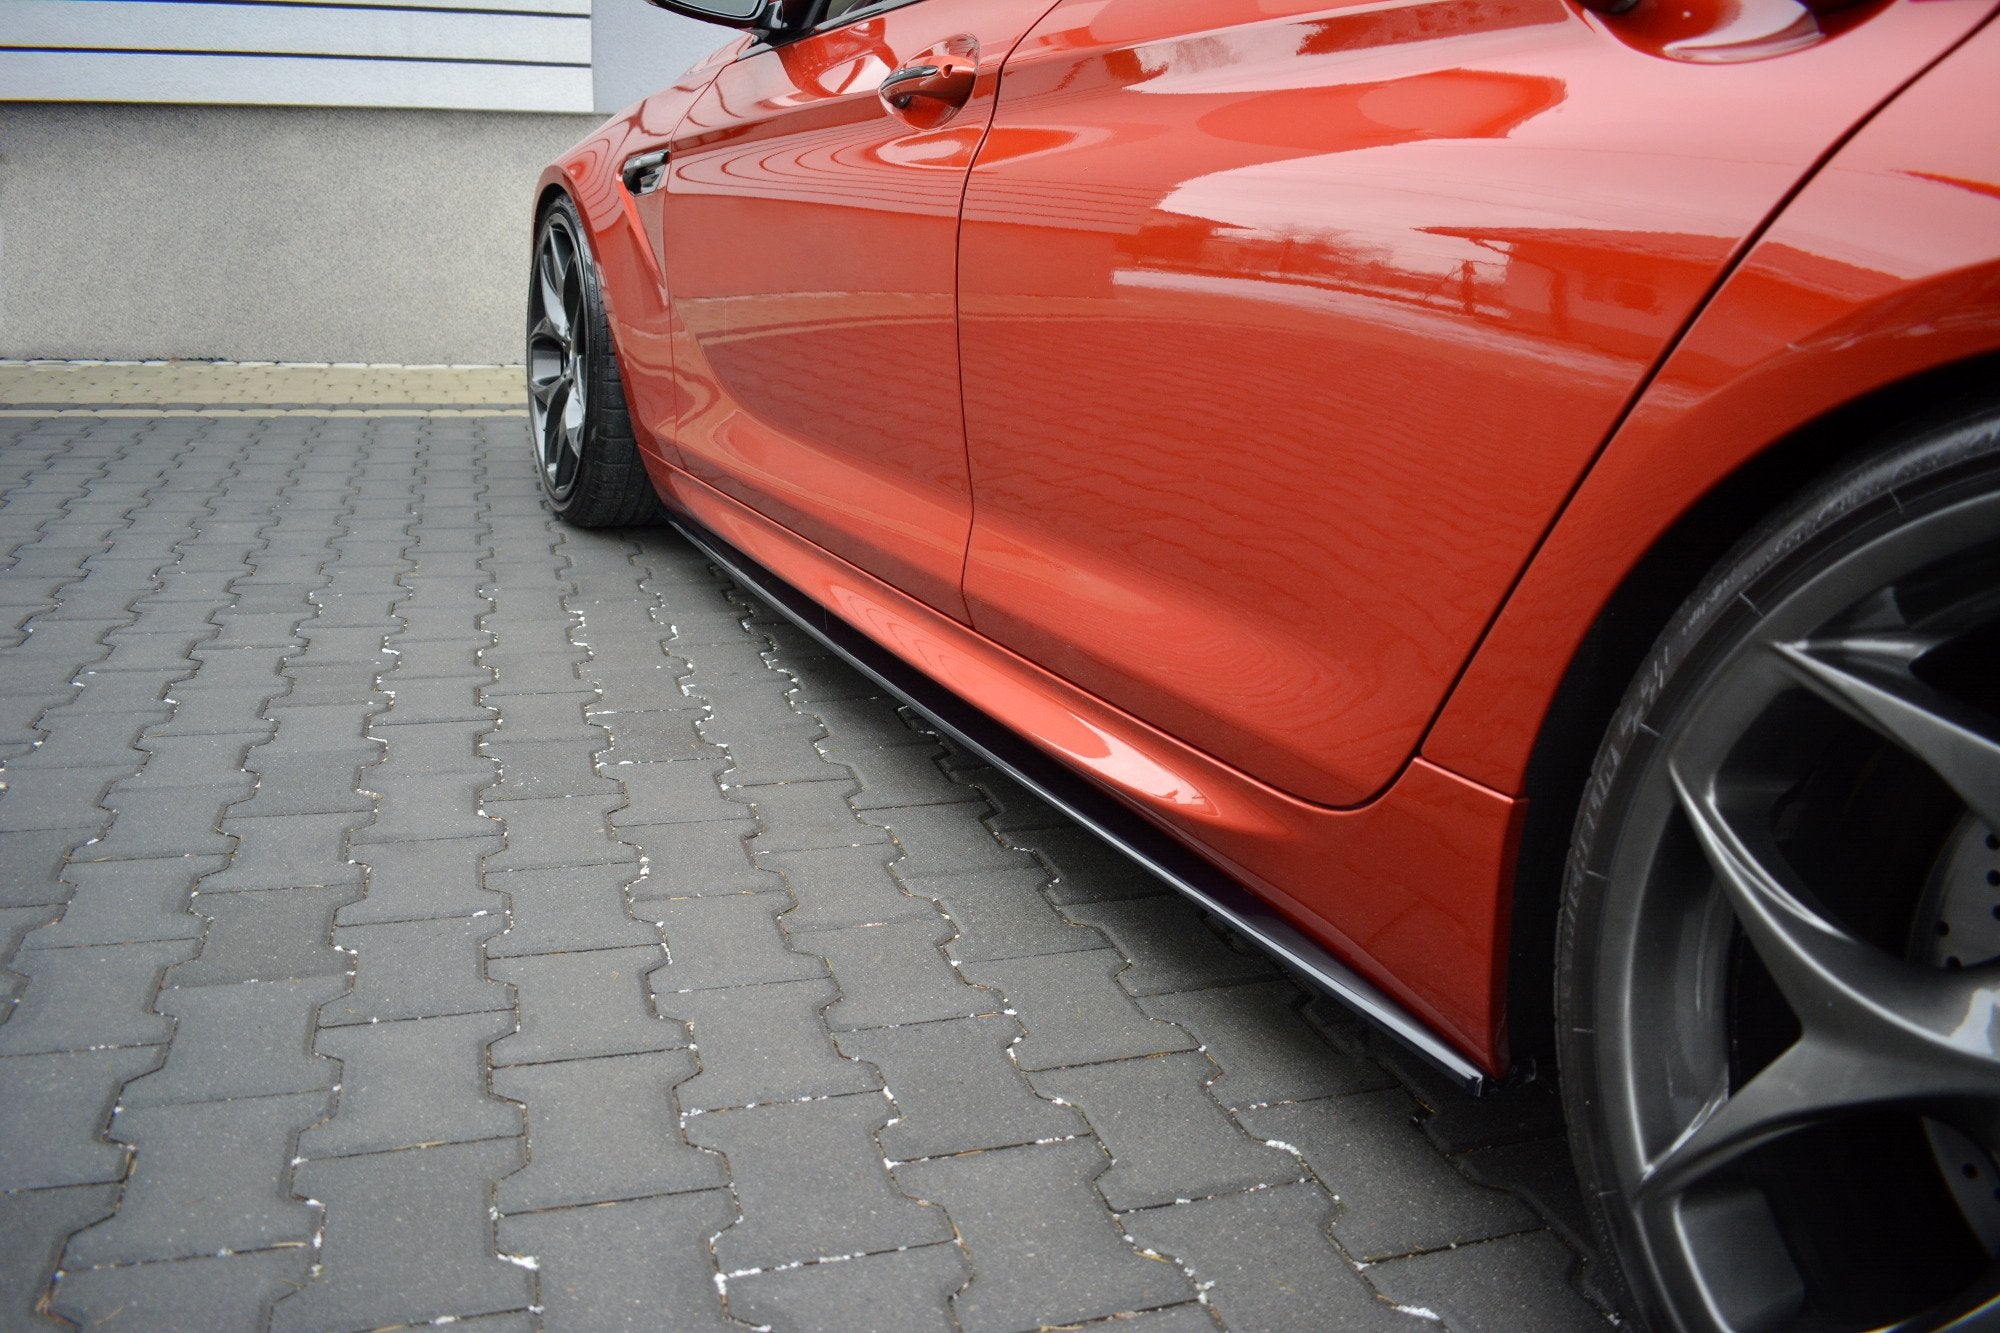 SIDE SKIRTS DIFFUSERS BMW M6 GRAN COUPÉ